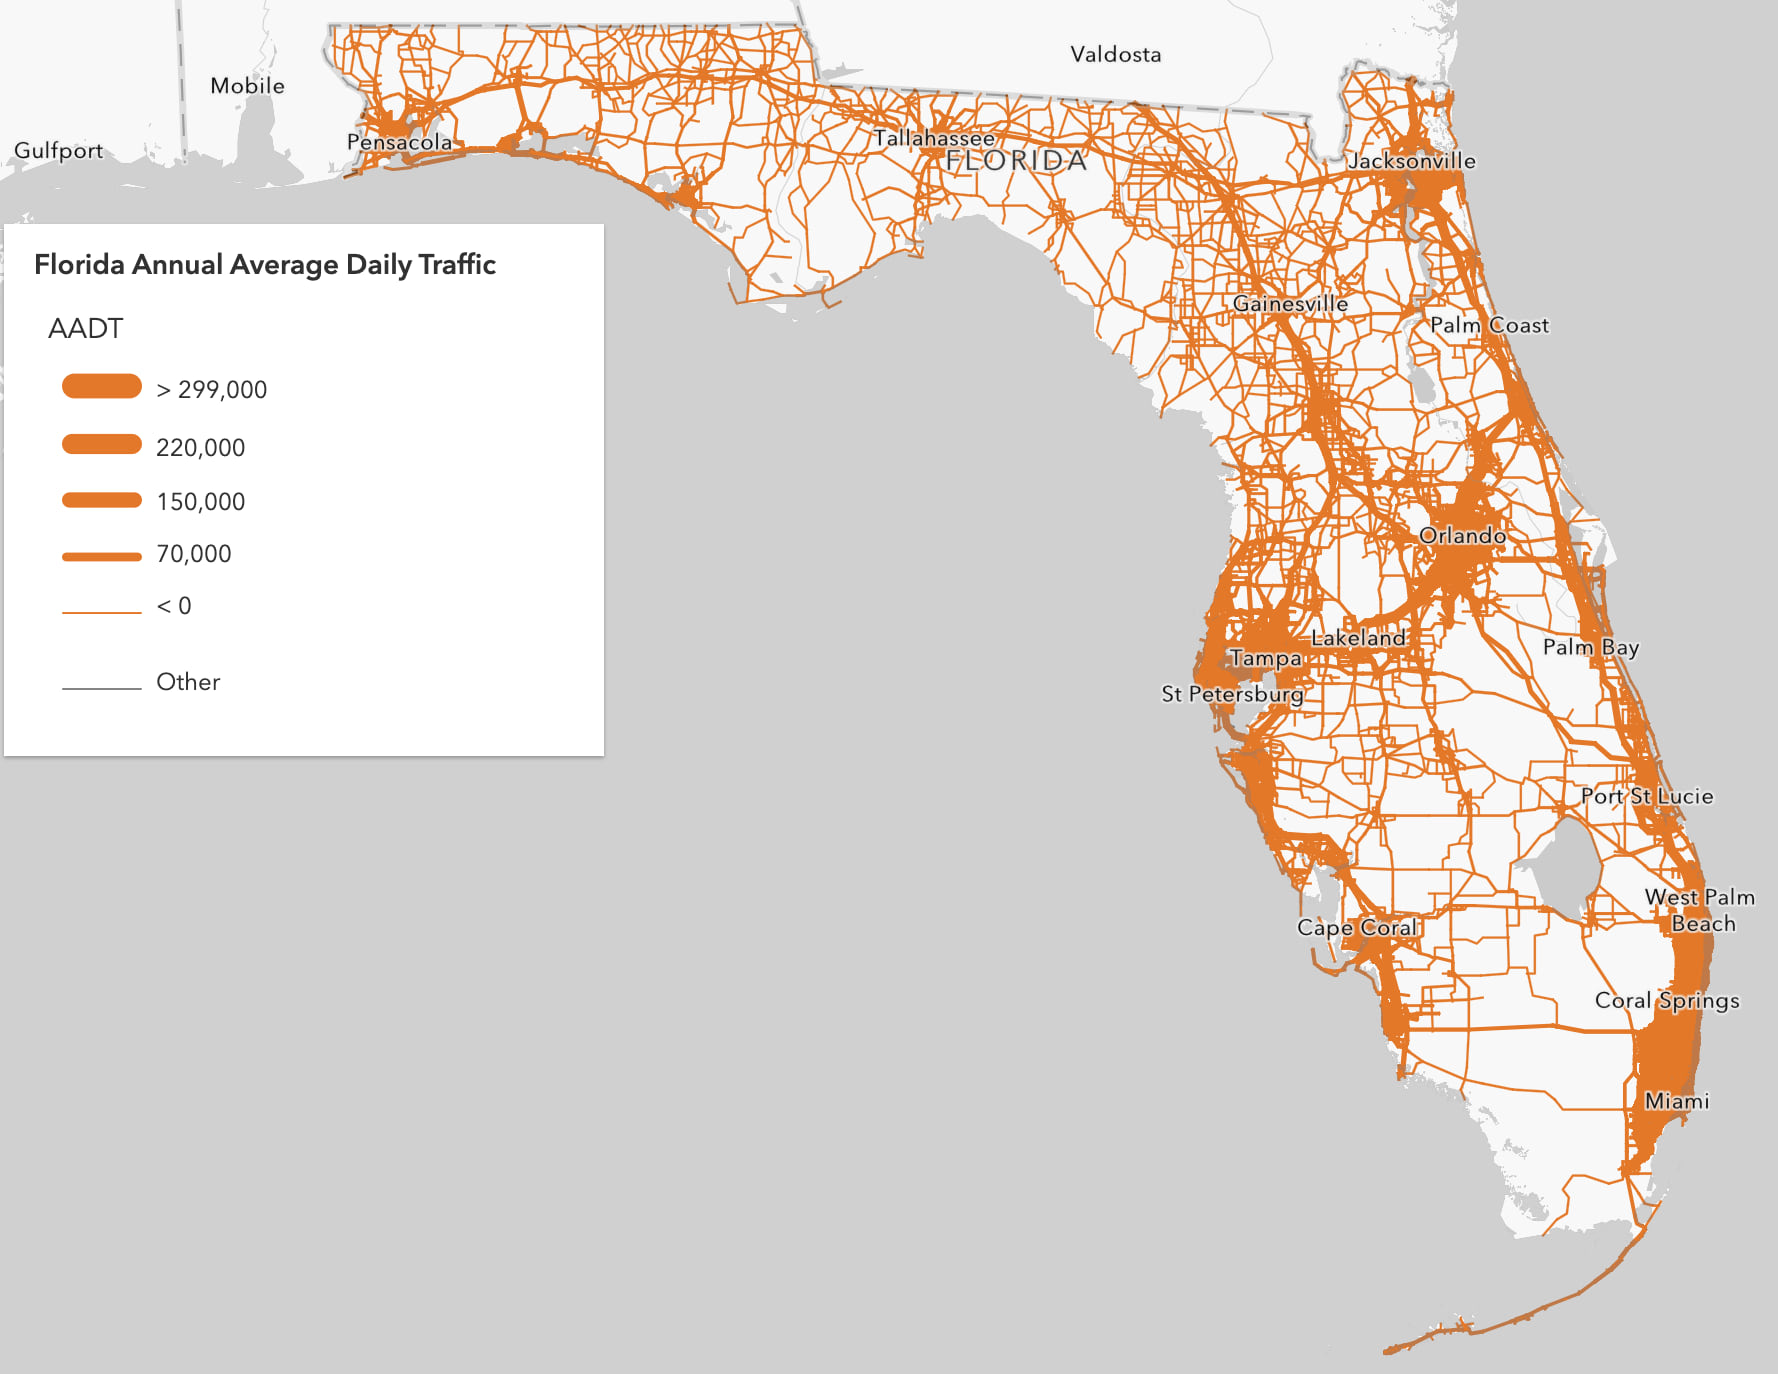 Annual average daily traffic on Florida highways. This line thickness works better when zoomed in, but degrades when zoomed out.